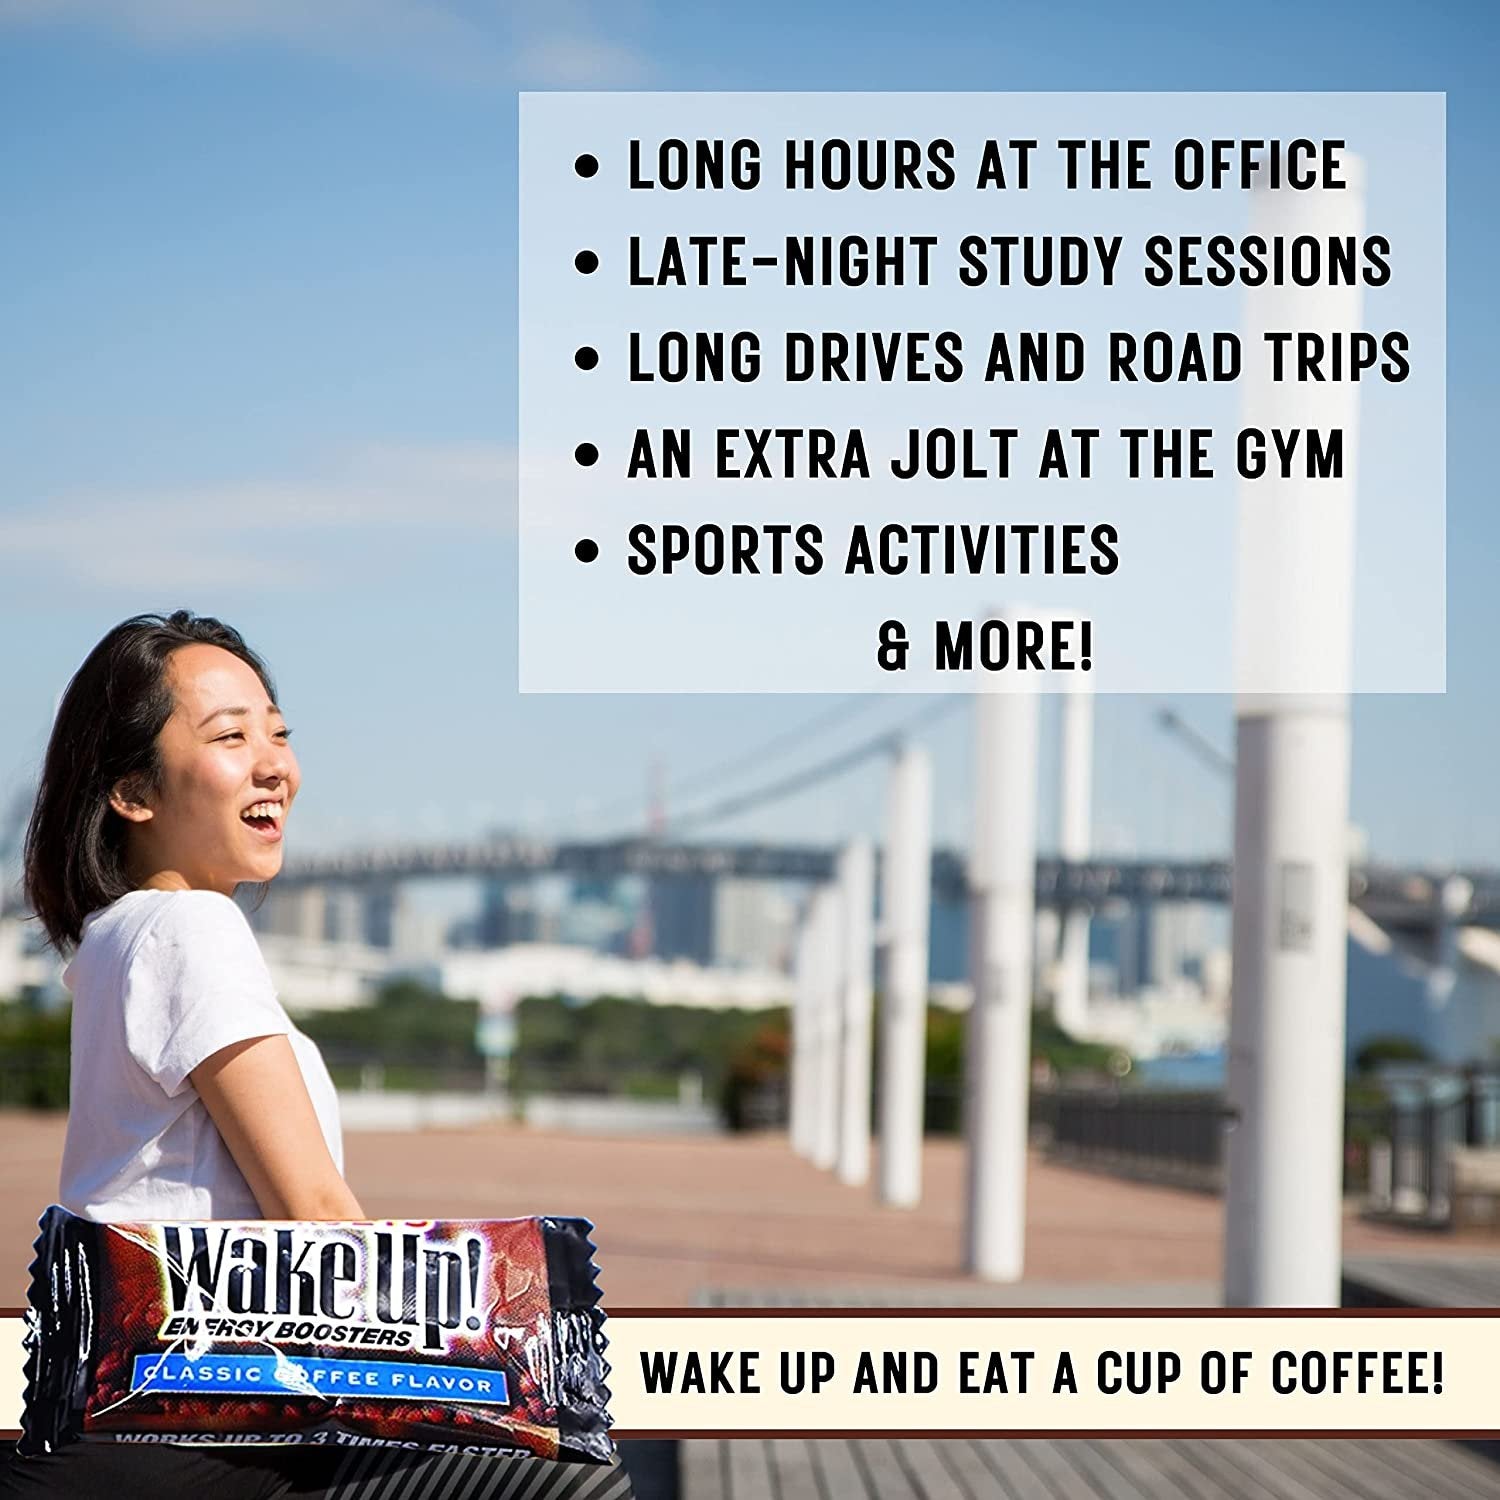 Worldwide Nutrition Enerjets Wake Up Energy Booster Caffeinated Drops - Instant Coffee Energy Supplements - Classic Flavor Pack of 3, 12 Drops Per Package with Worldwide Multi Purpose Key Chain